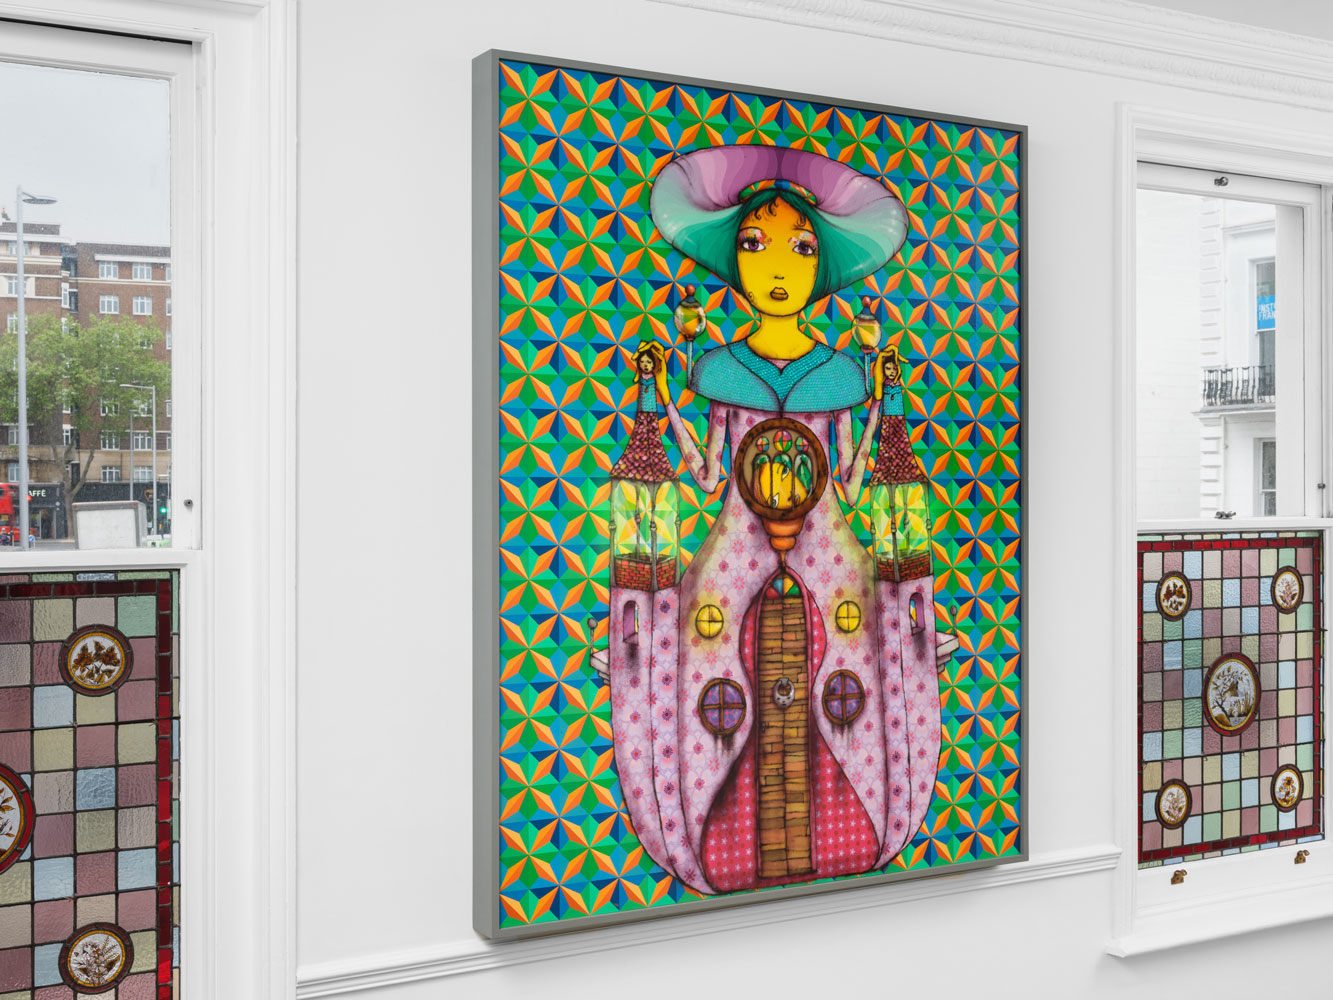 OSGEMEOS: In the Corner of the Mind, Installation View